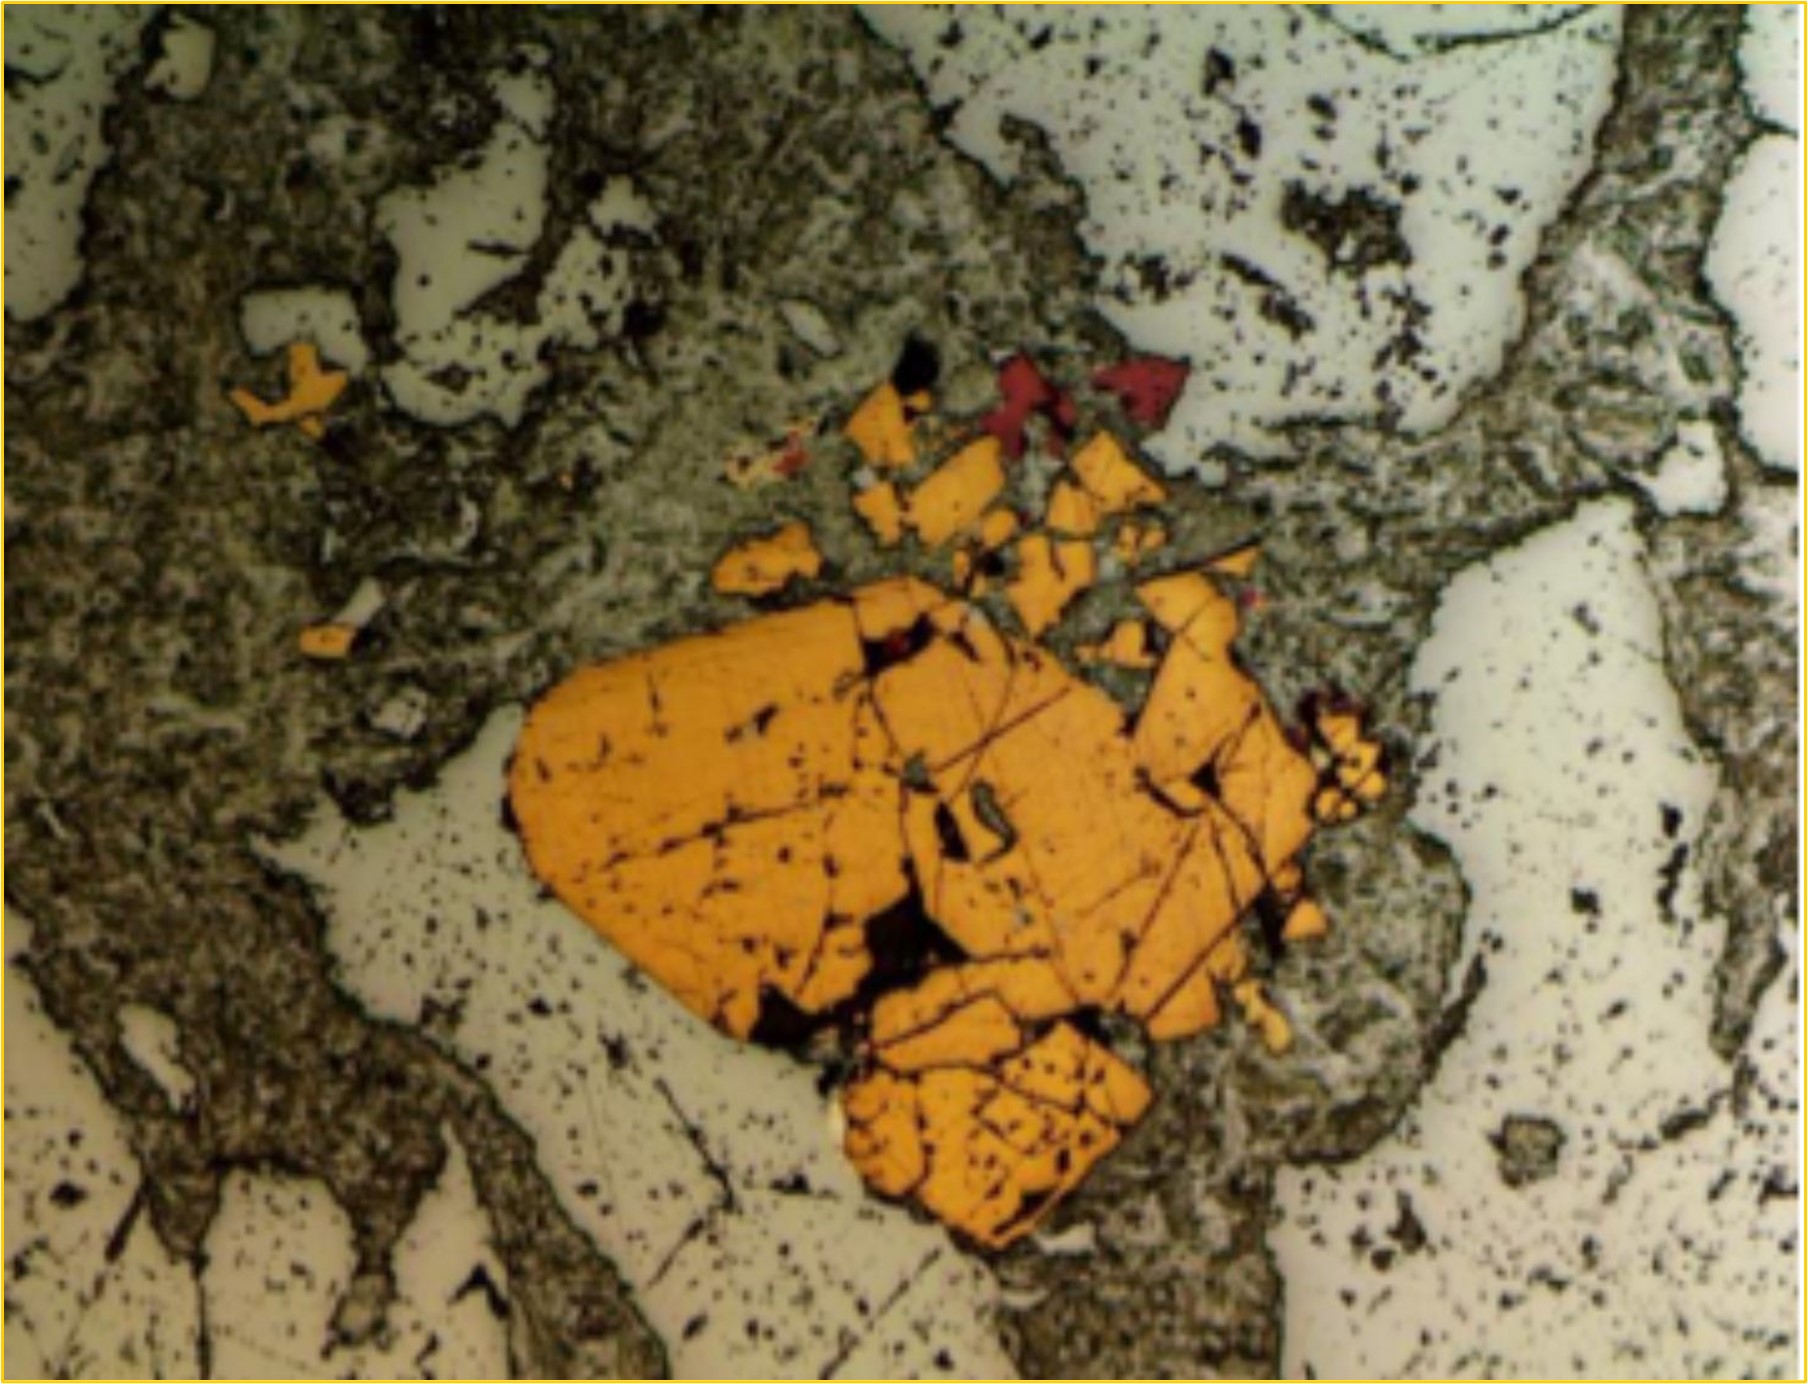 Drill core 20MT-002 showing a  grain of pyrite and arsenian pyrite (dark yellow), chalcopyrite (red), and tetrahedrite (light yellow). These sulphides are within a groundmass of fine-grained phengitic muscovite, chlorite, and albite. The field of view is 2 millimetres.